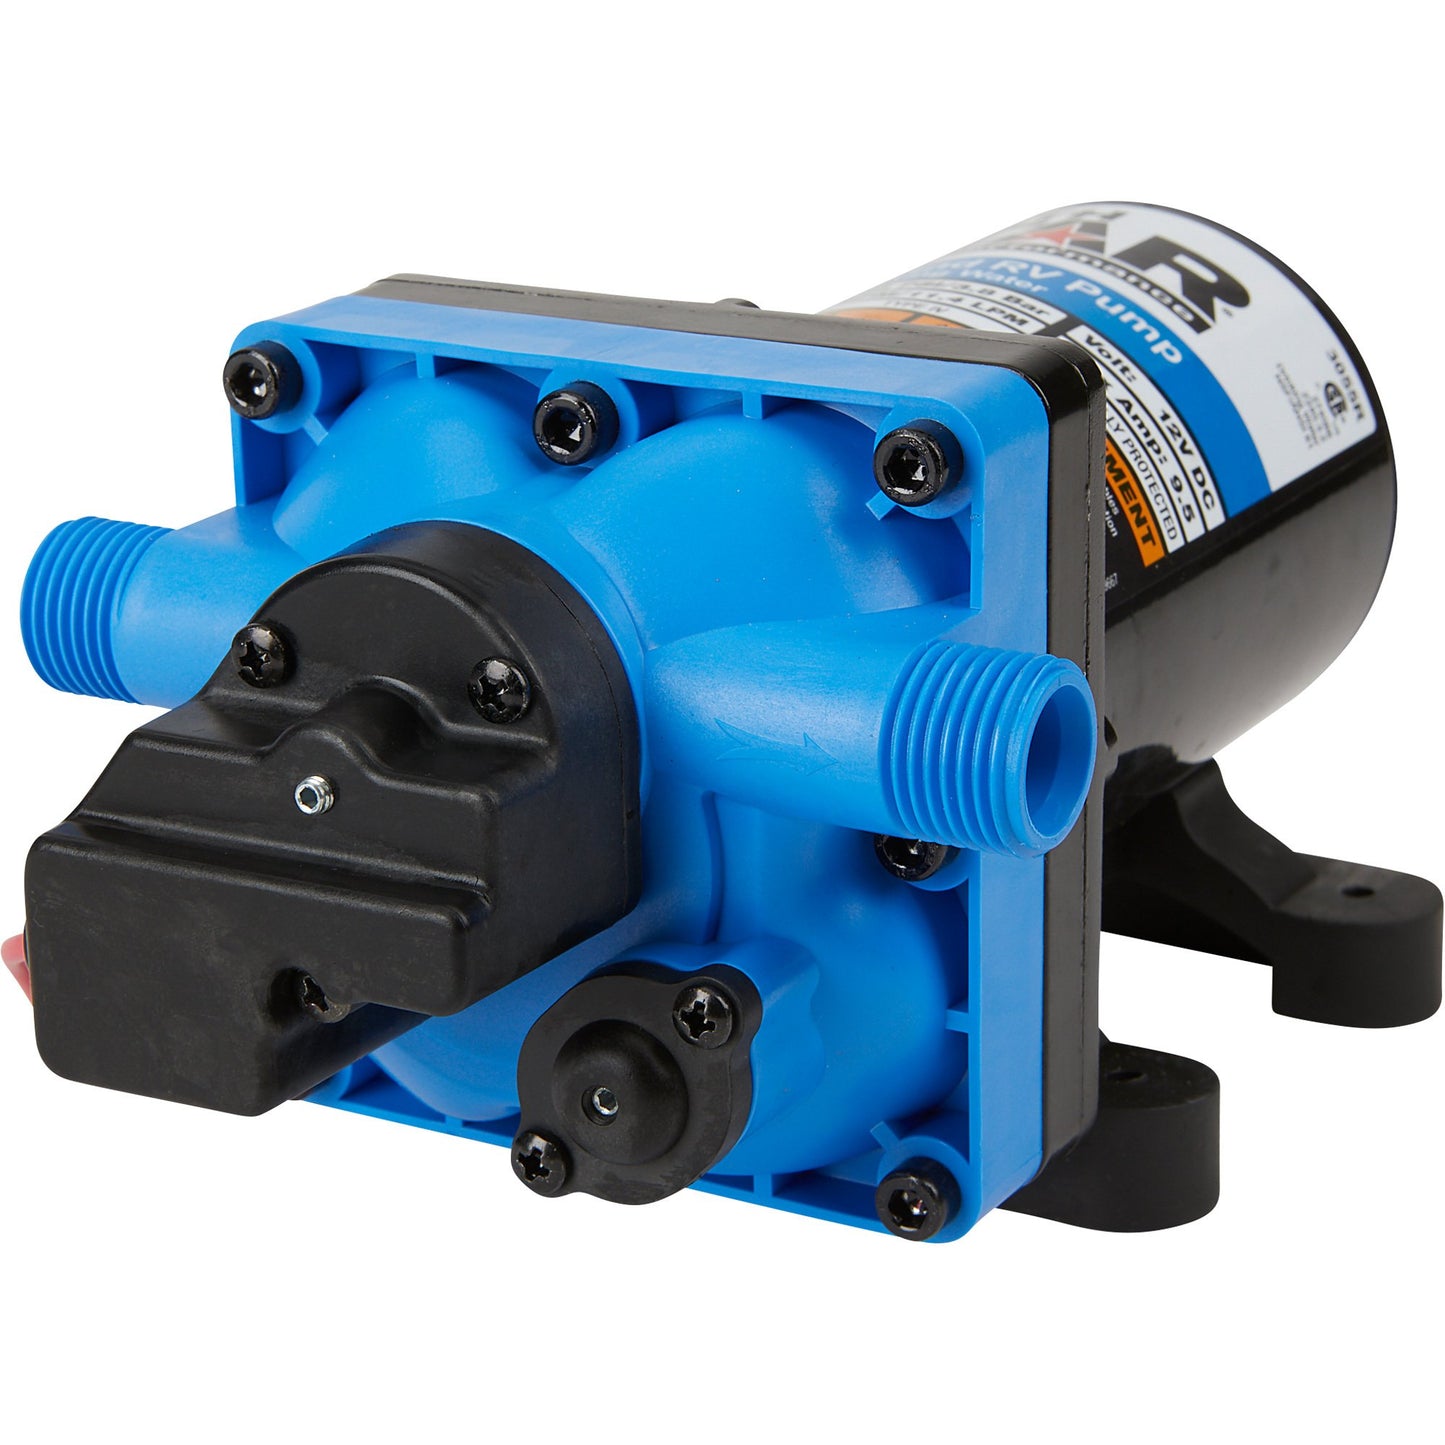 NorthStar 12V On-Demand RV Potable Water Pump 11.3 LPM/3.0 GPM, 55PSI -  1/2in. NPS-M Ports